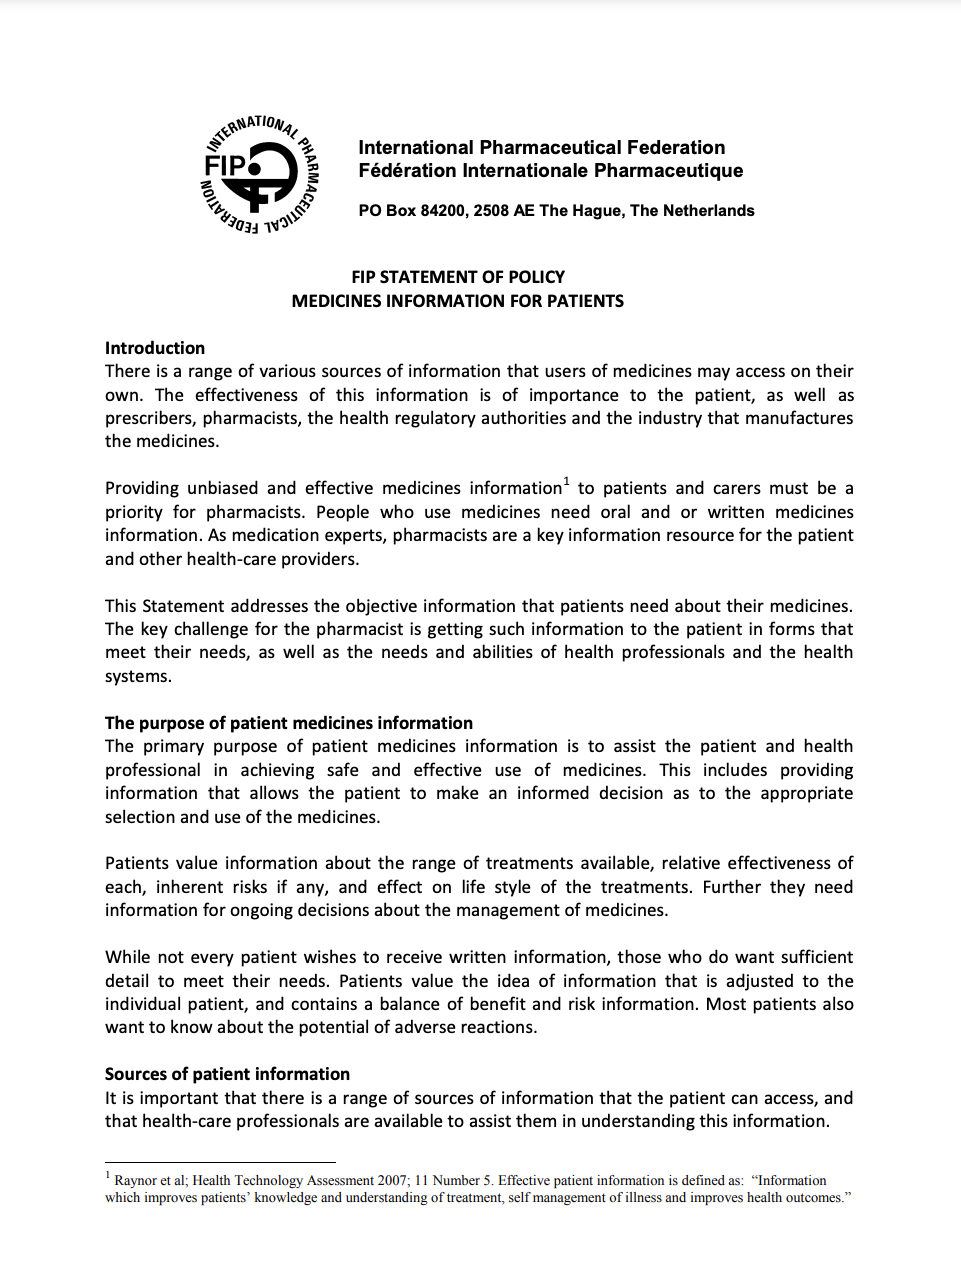 FIP Statement of Policy: Medicines Information for Patients (2008) Thumbnail